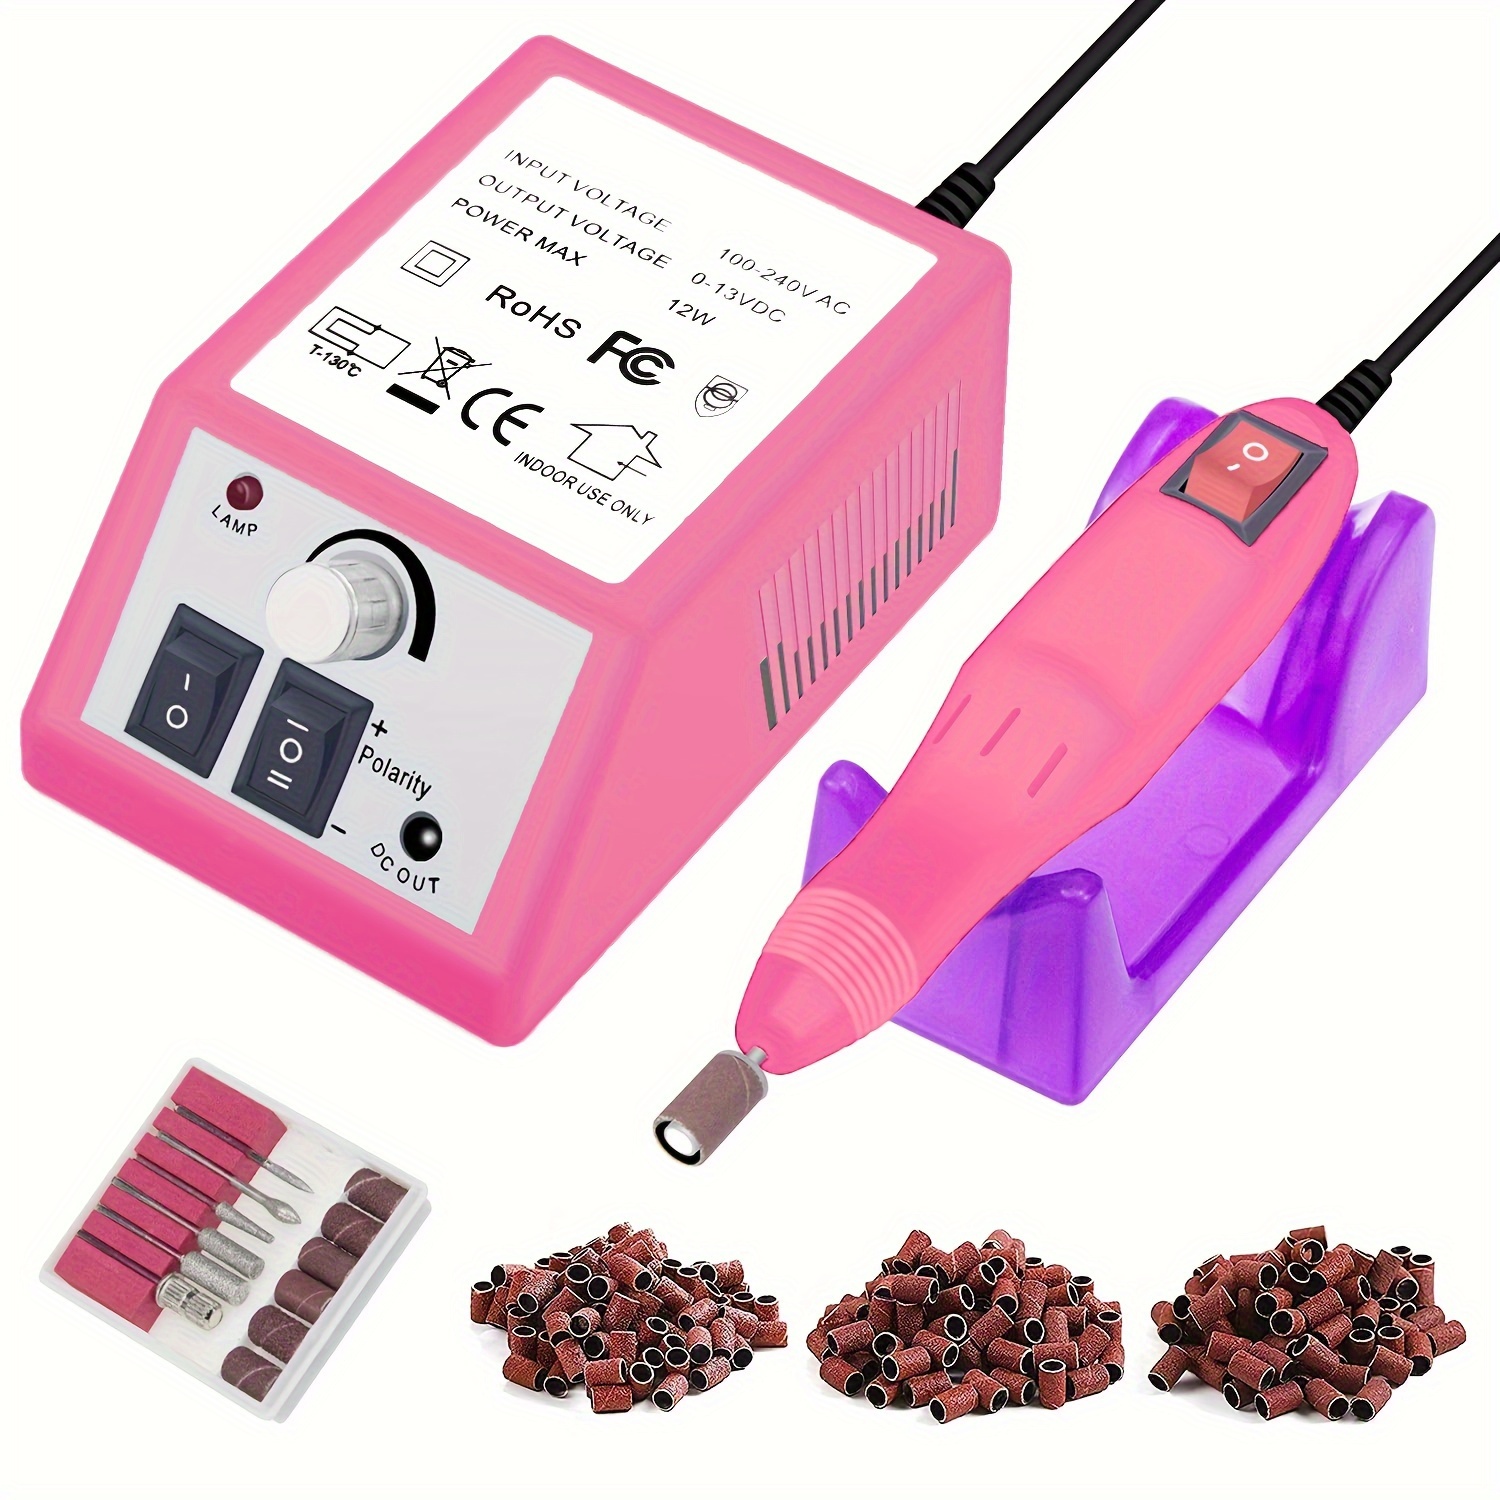 

Electric Nail Drill Machine Nails File Electric Nail Drill Kit Low Noise Vibration With 156pcs Sanding Bands Gel Nails Polisher Sets For Home Salon Use Manicure Pedicure (pink)